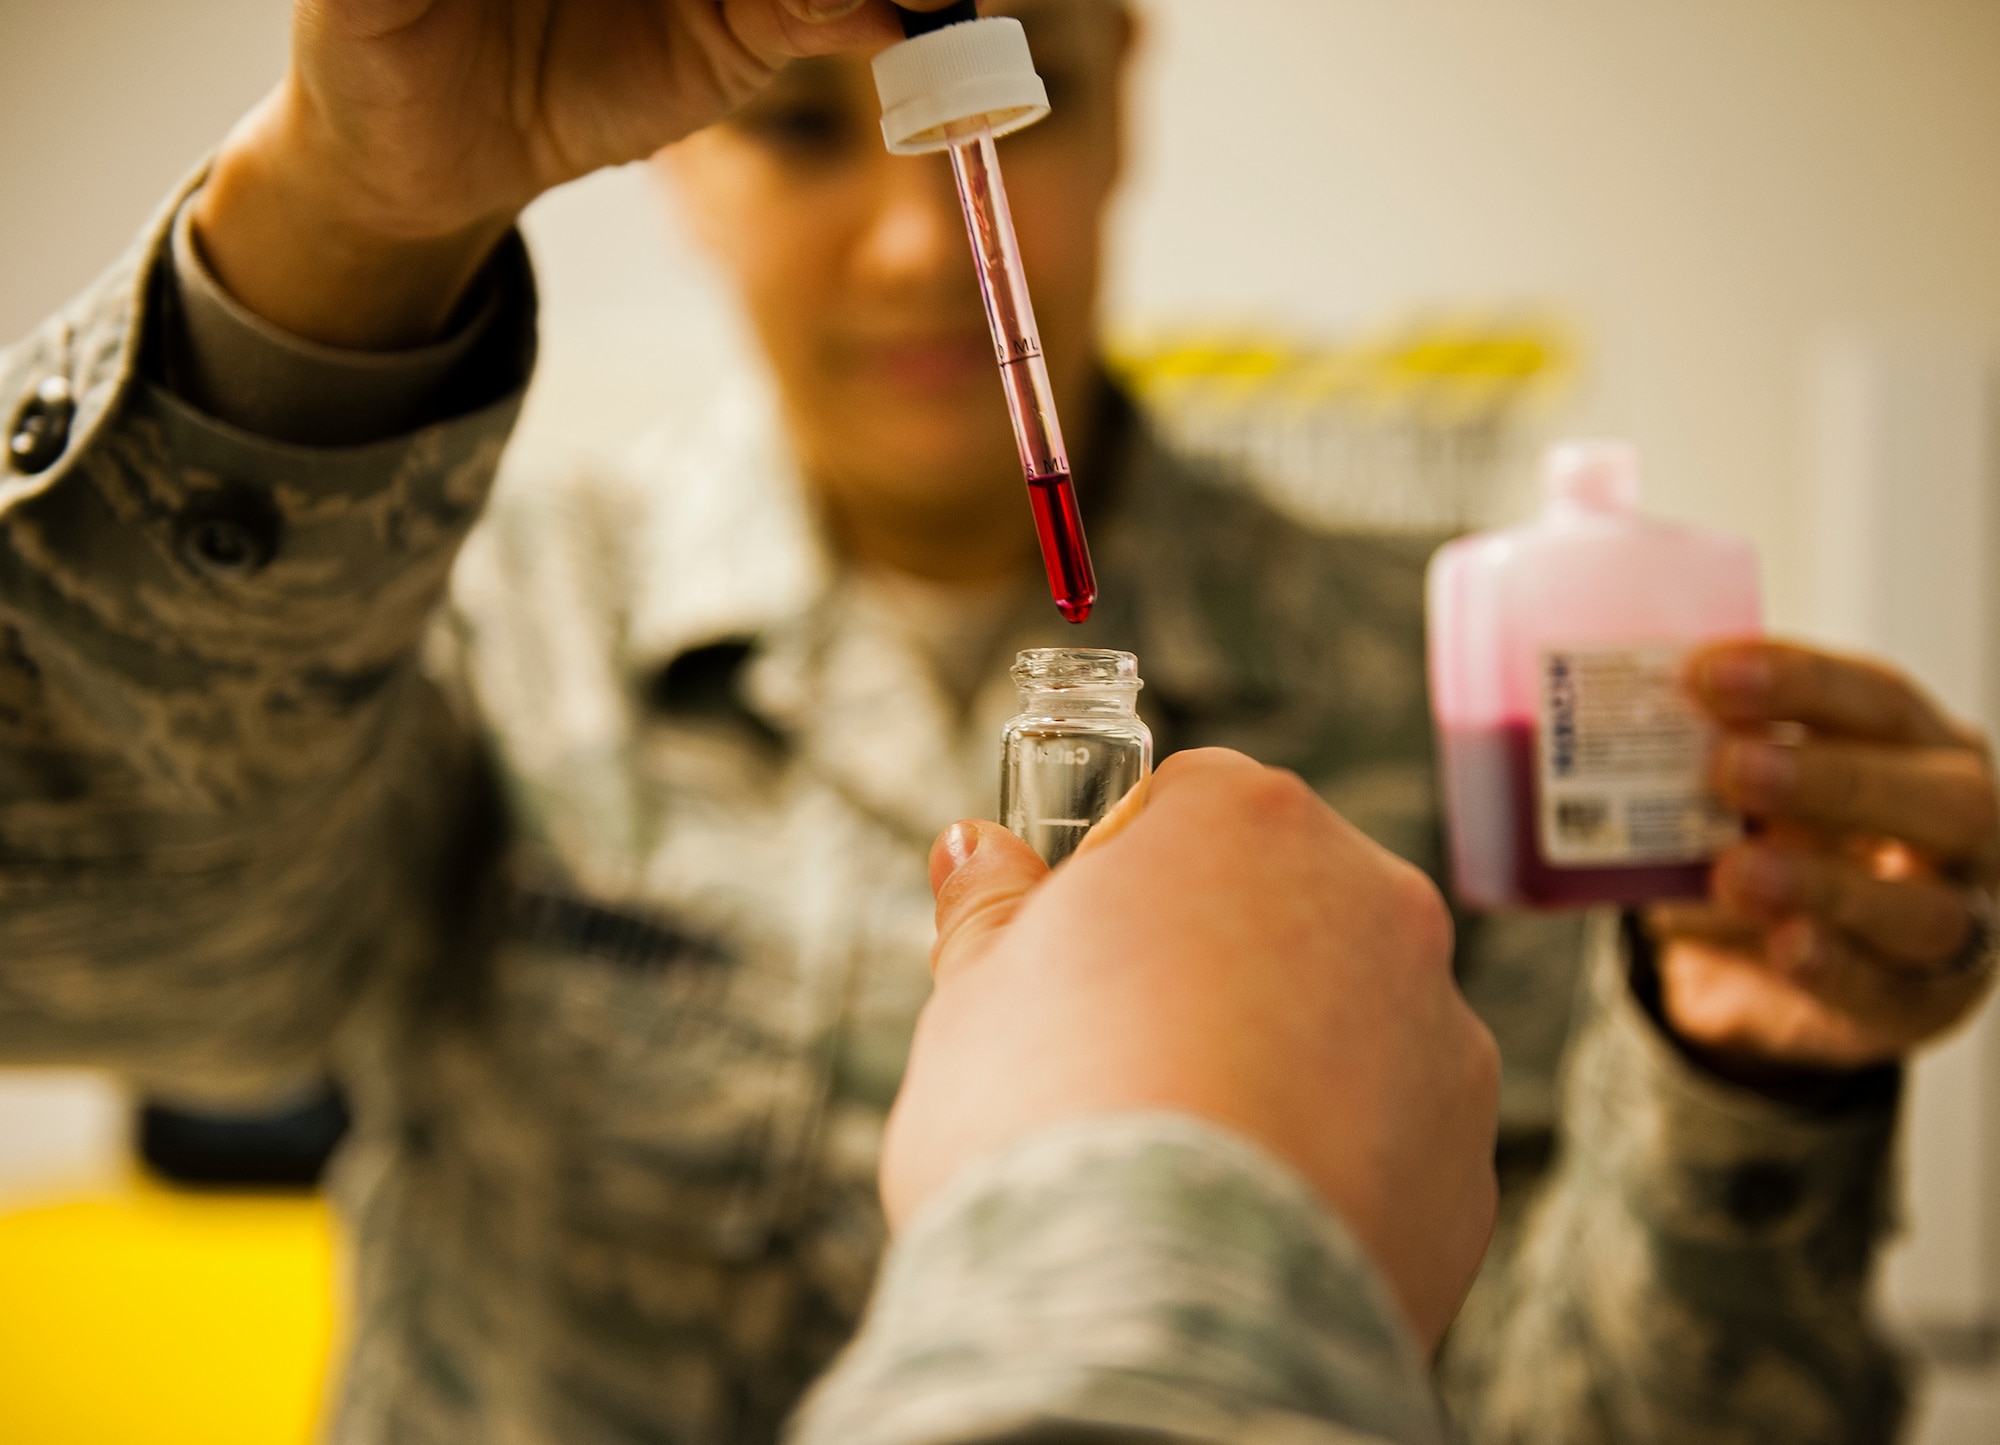 Tech. Sgt. Ninfa McKnight, 65th Medical Group bioenvironmental non-commissioned officer in charge, drops a solution into a vial of water to test the pH balance on Lajes Field, Azores, Portugal, Jan. 22, 2015. The 65th MDG recently renewed their accreditation through the Accreditation Association for Ambulatory Health Care, Inc. (U.S. Air Force photo/Staff Sgt. Zachary Wolf)